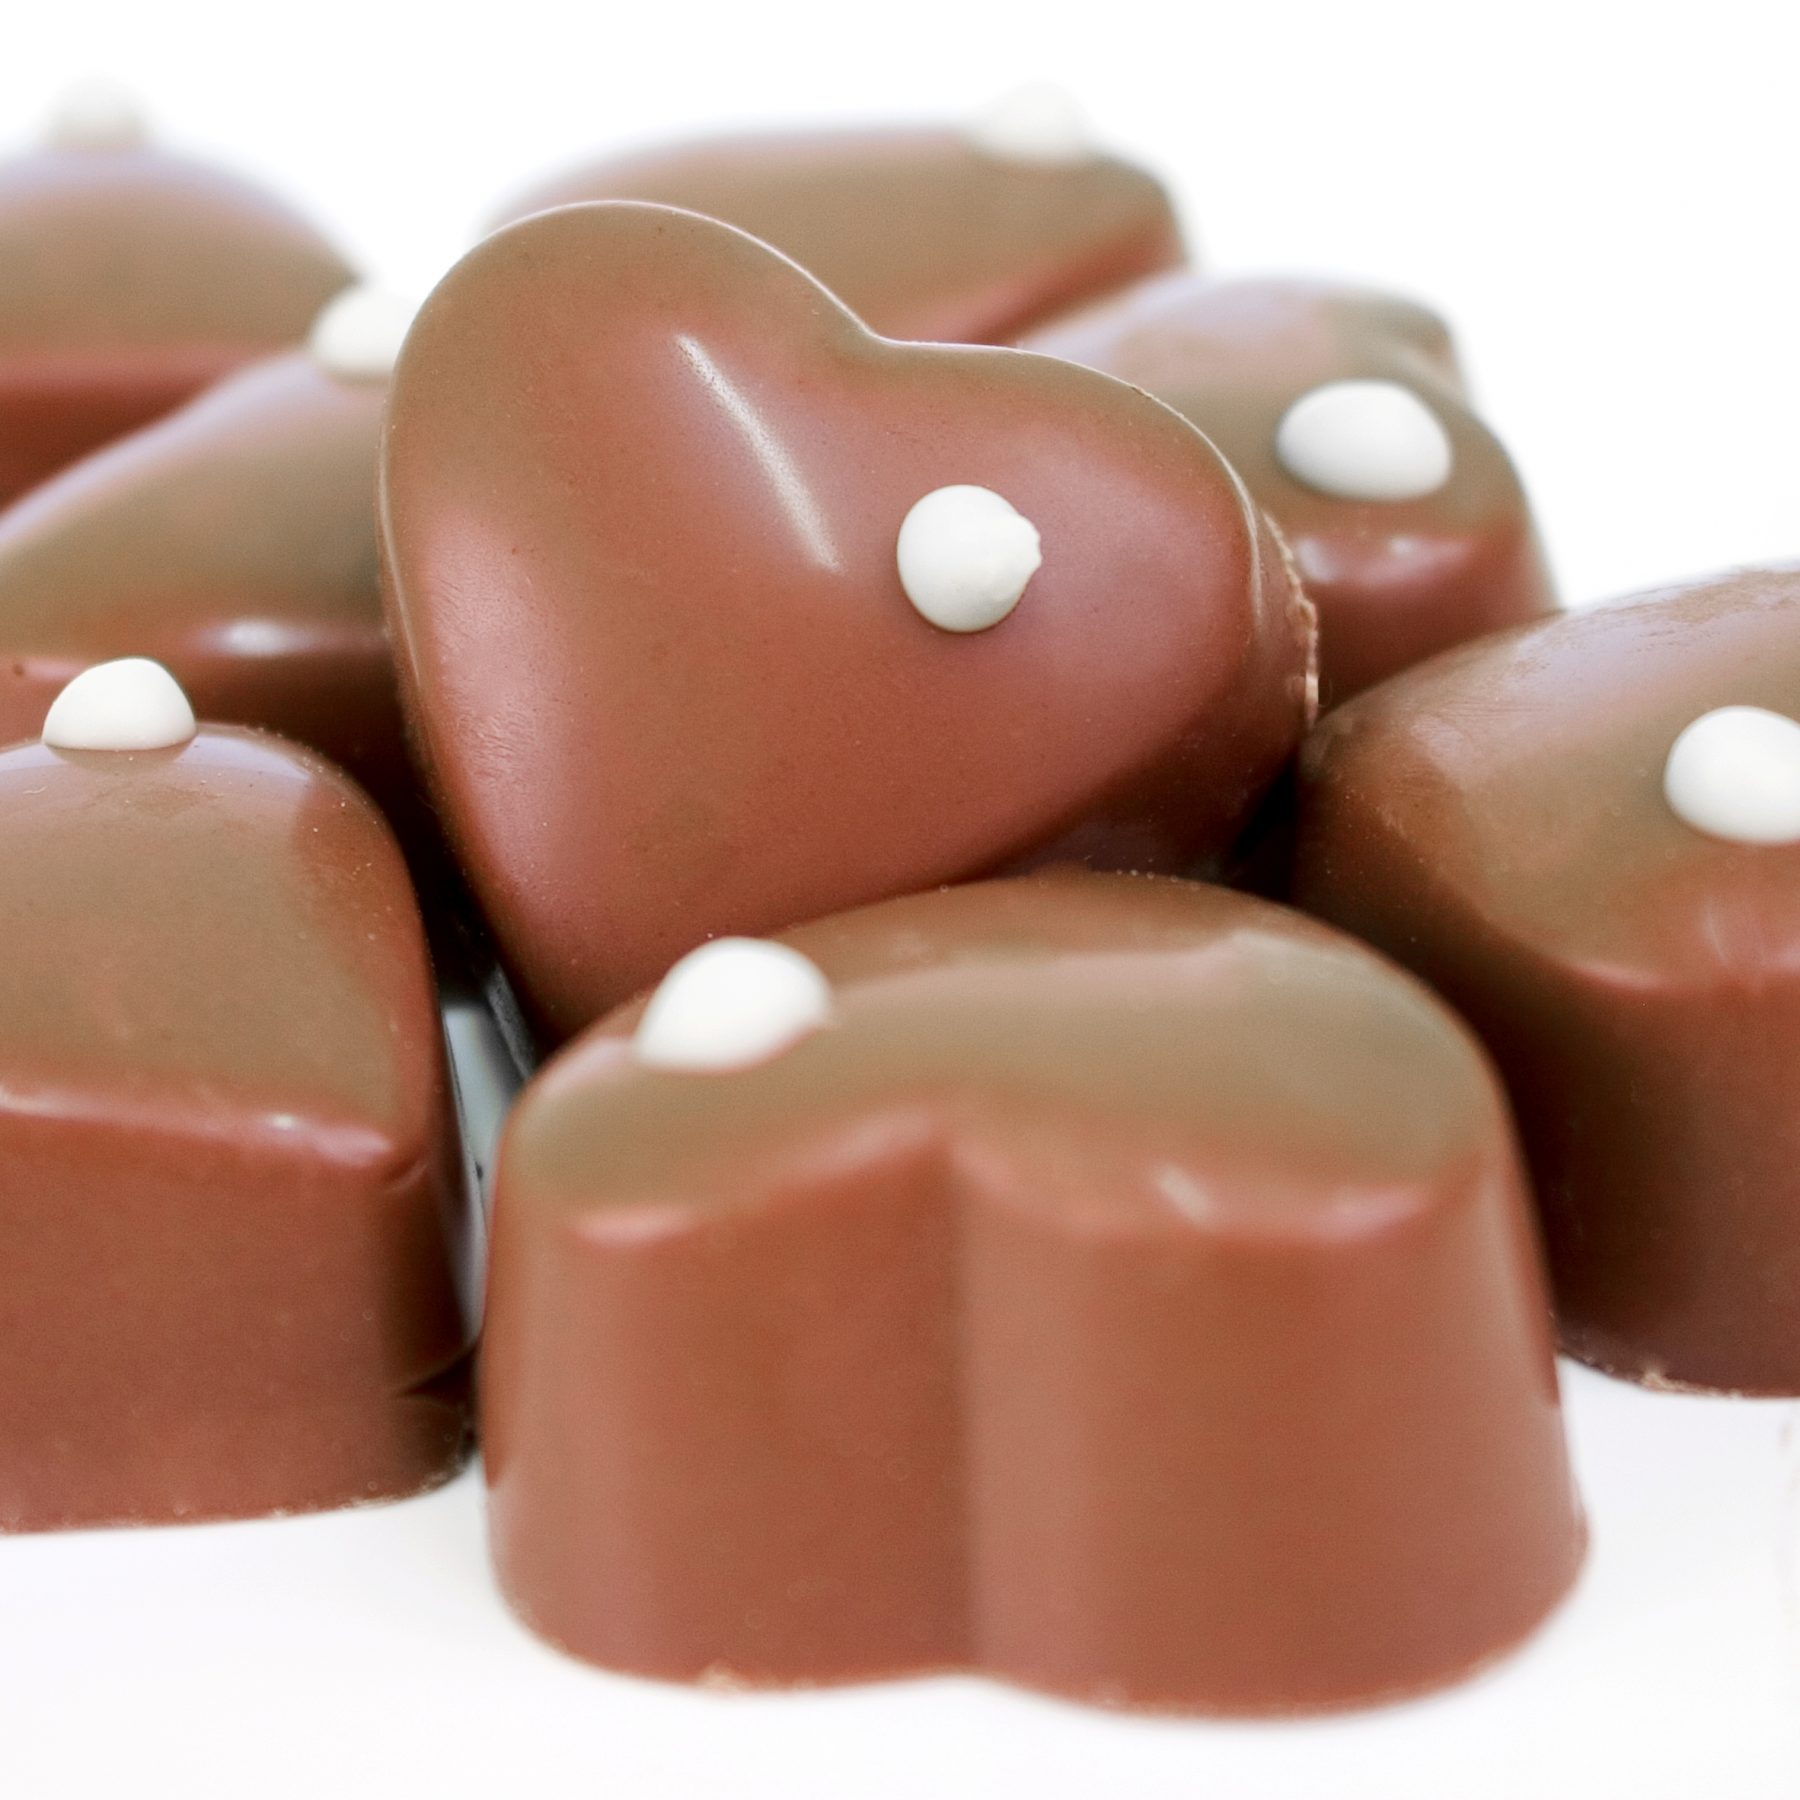 Milk Chocolate Hearts are a perfect choice at our Valentine's chocolate making workshop